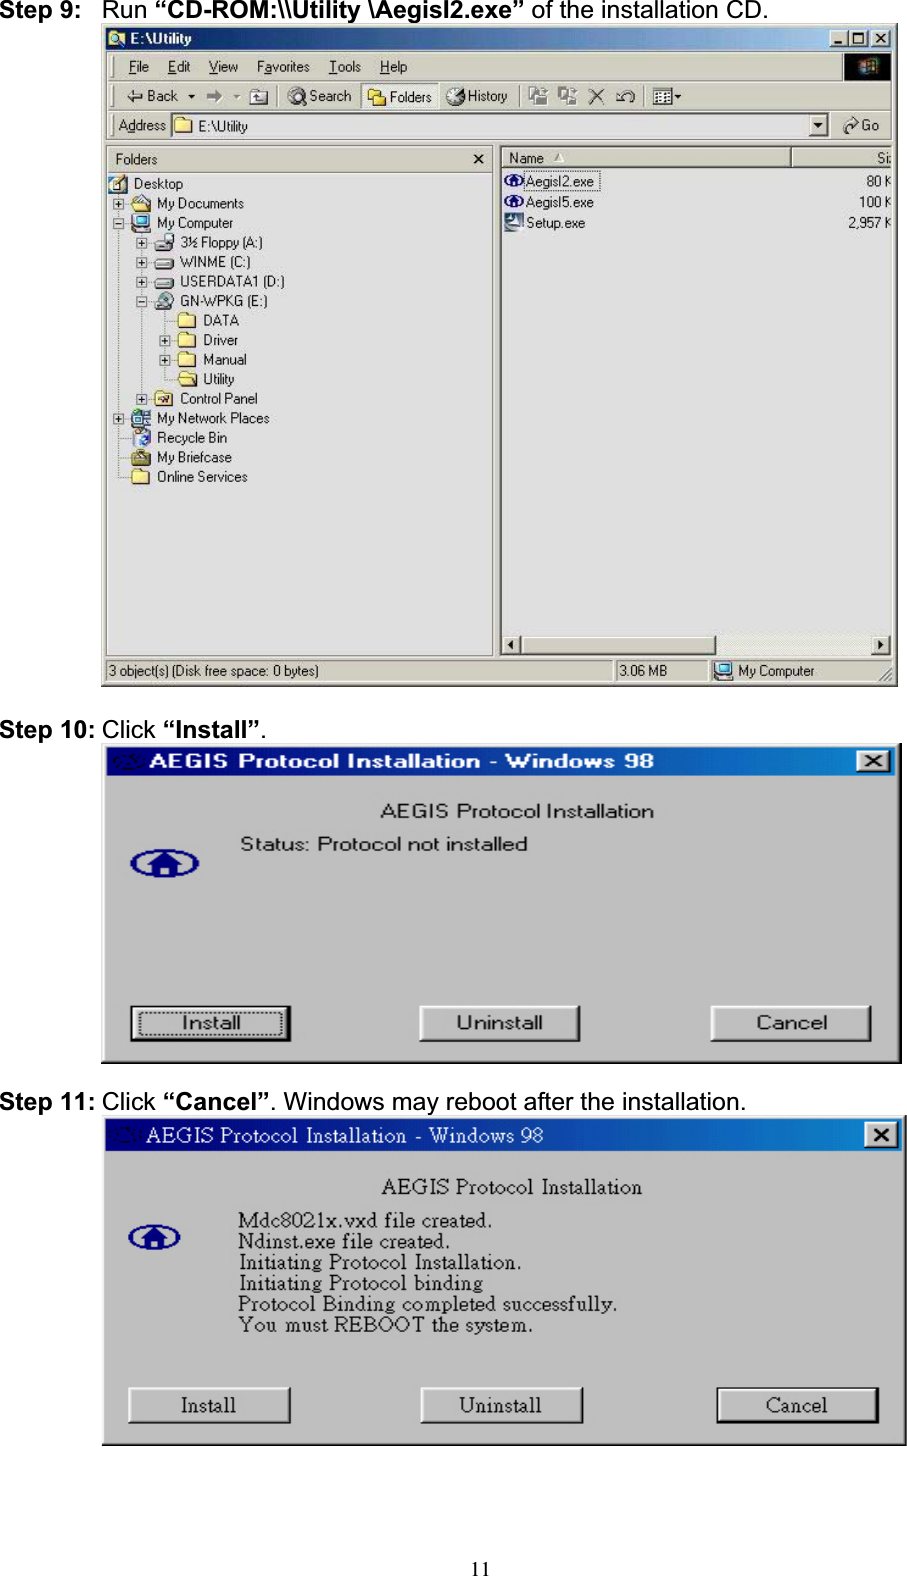 11Step 9: Run “CD-ROM:\\Utility \AegisI2.exe” of the installation CD. Step 10: Click “Install”.Step 11: Click “Cancel”. Windows may reboot after the installation. 